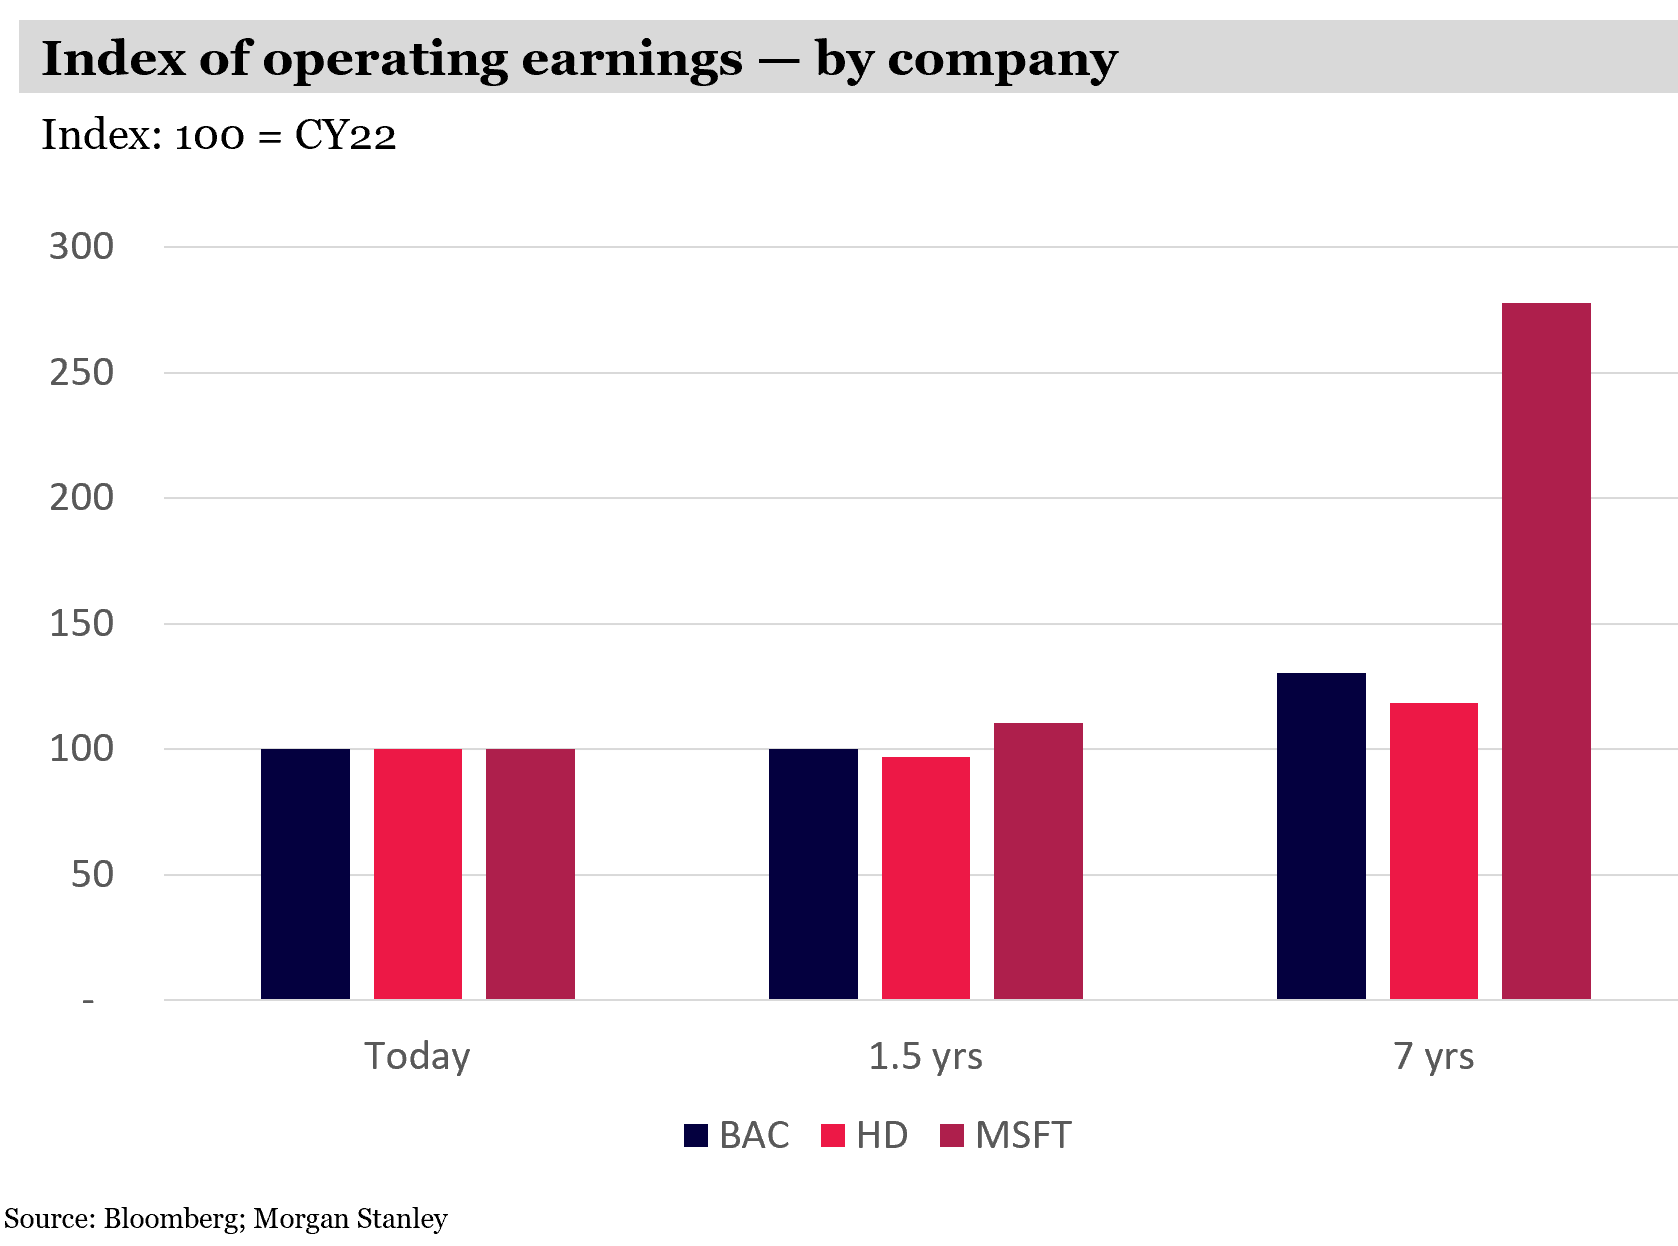 Index of operating earnings - by company